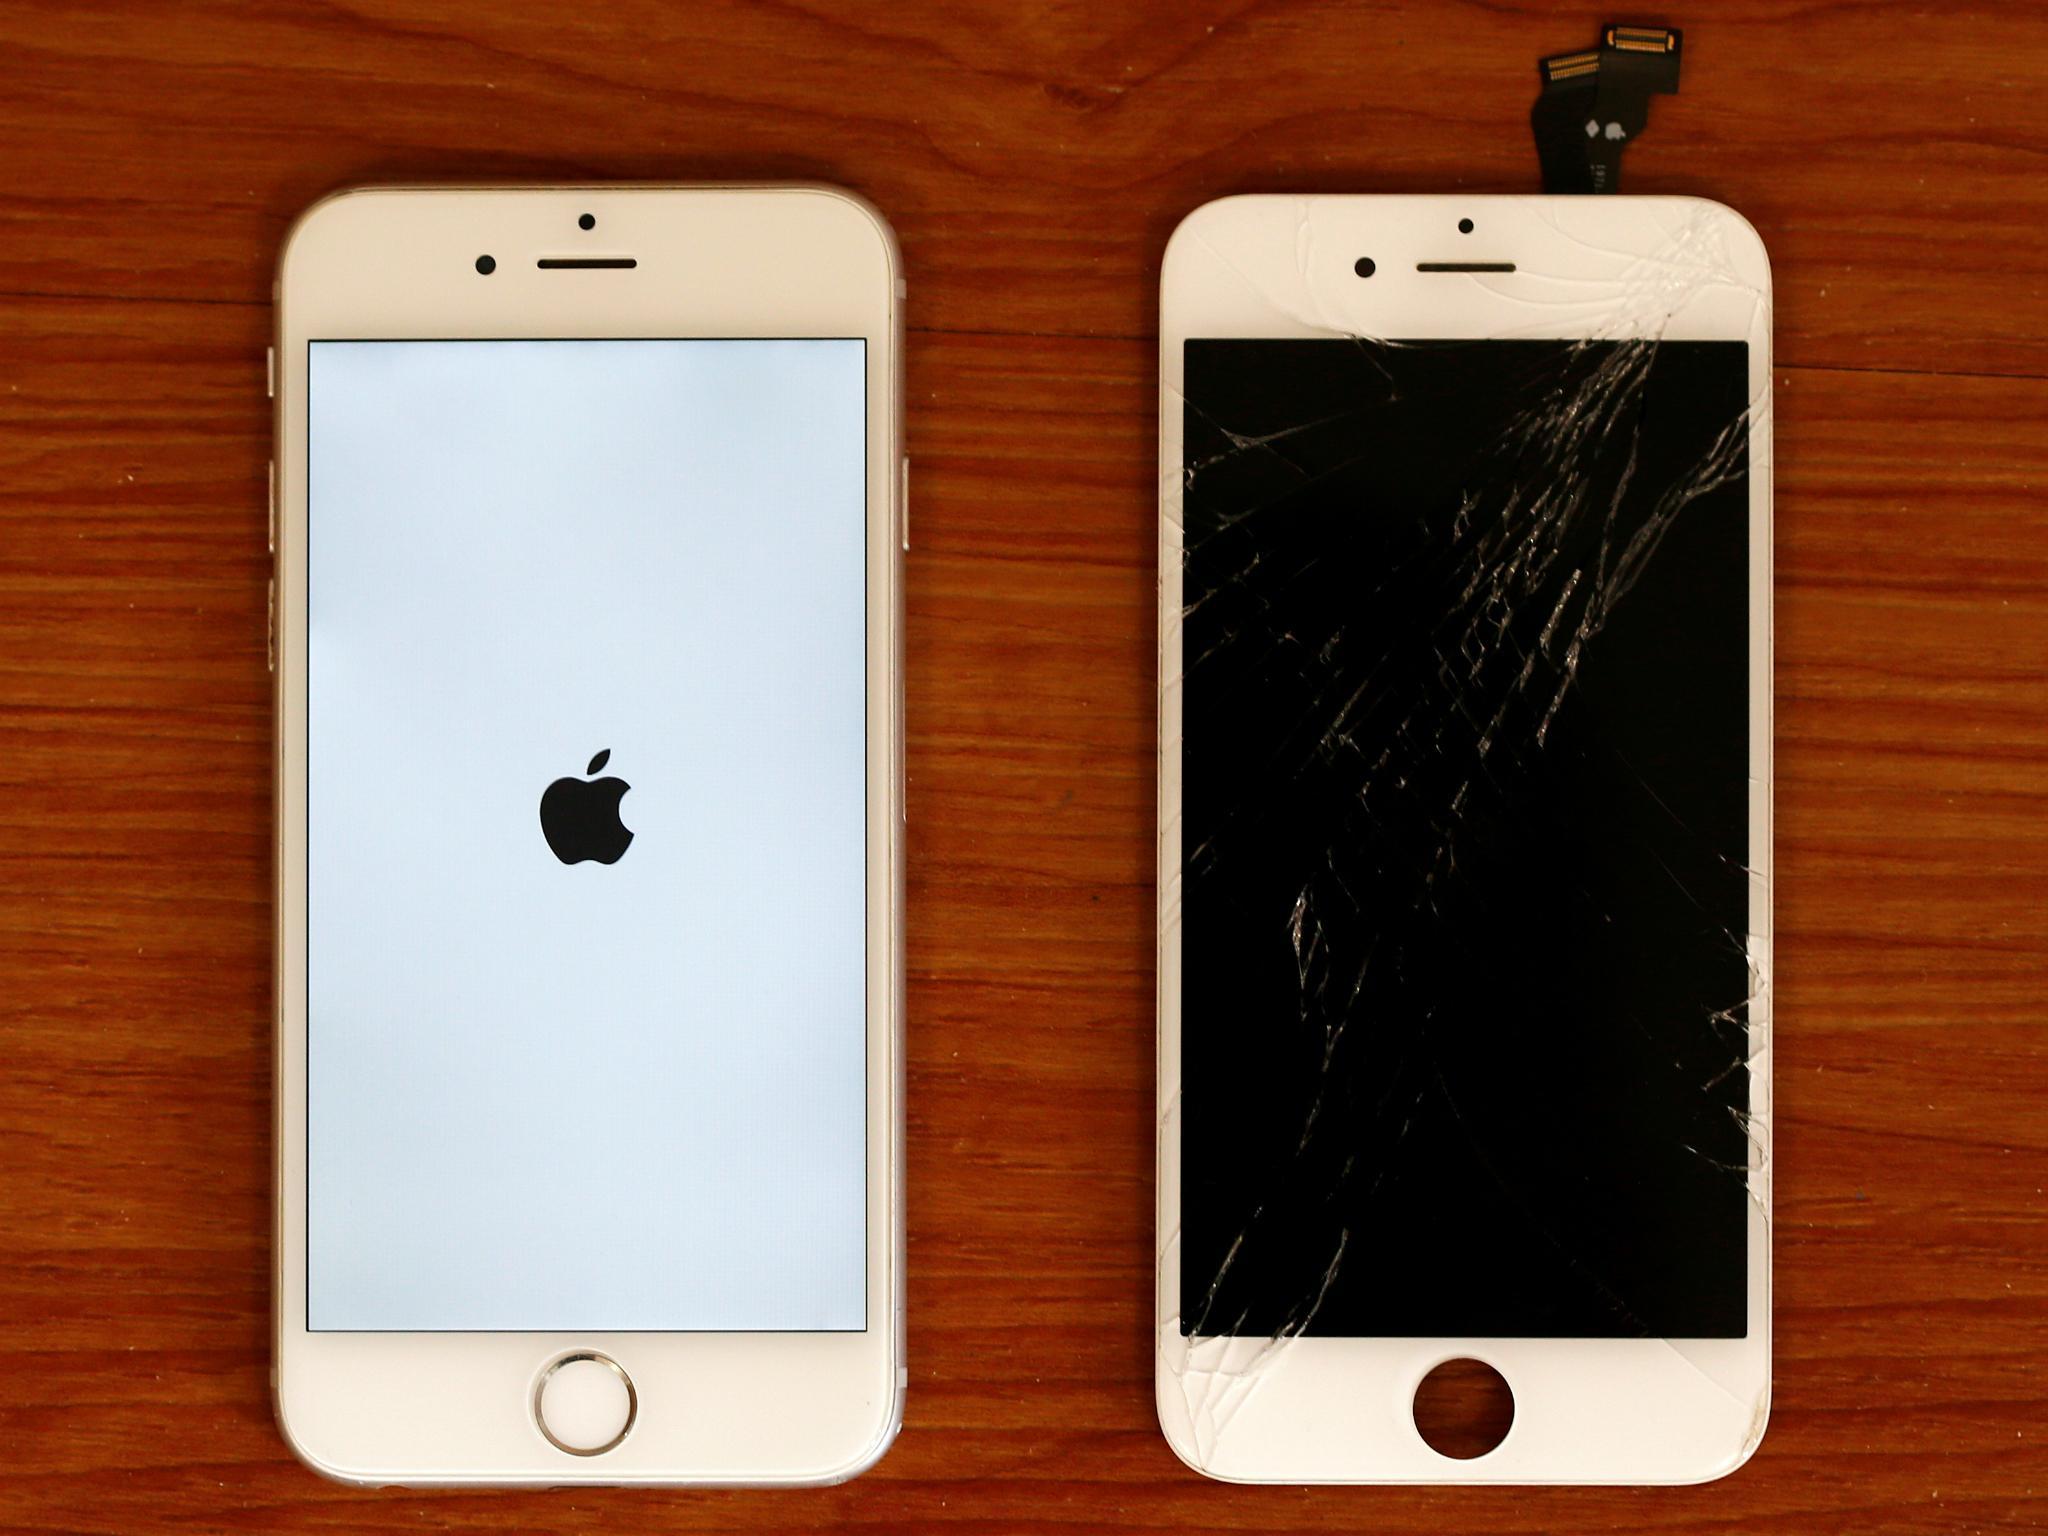 A destroyed iPhone screen and a fixed mobile phone, iPhone 6 by Apple, are pictured in a shop in Fuerstenfeldbruck near Munich, Germany August 16, 2016